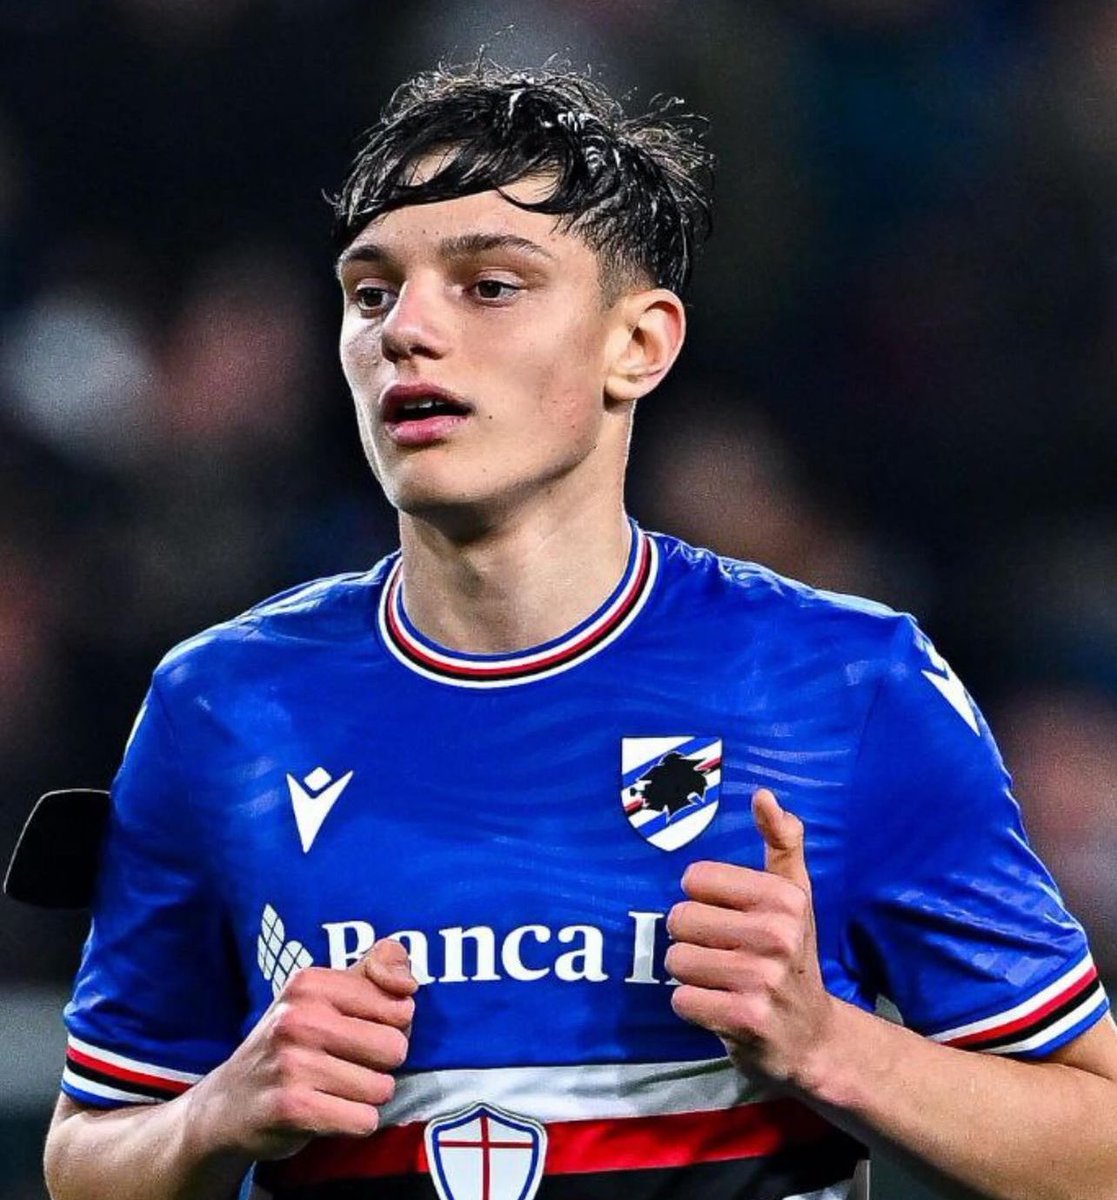 🇮🇹 Giovanni Leoni (17) has looked very good at CB for @sampdoria since winning his first starts. Just scored his first pro goal vs. Sampdoria! In just his 5th start. 🔥 In a tough battle vs. Palermo at the moment.